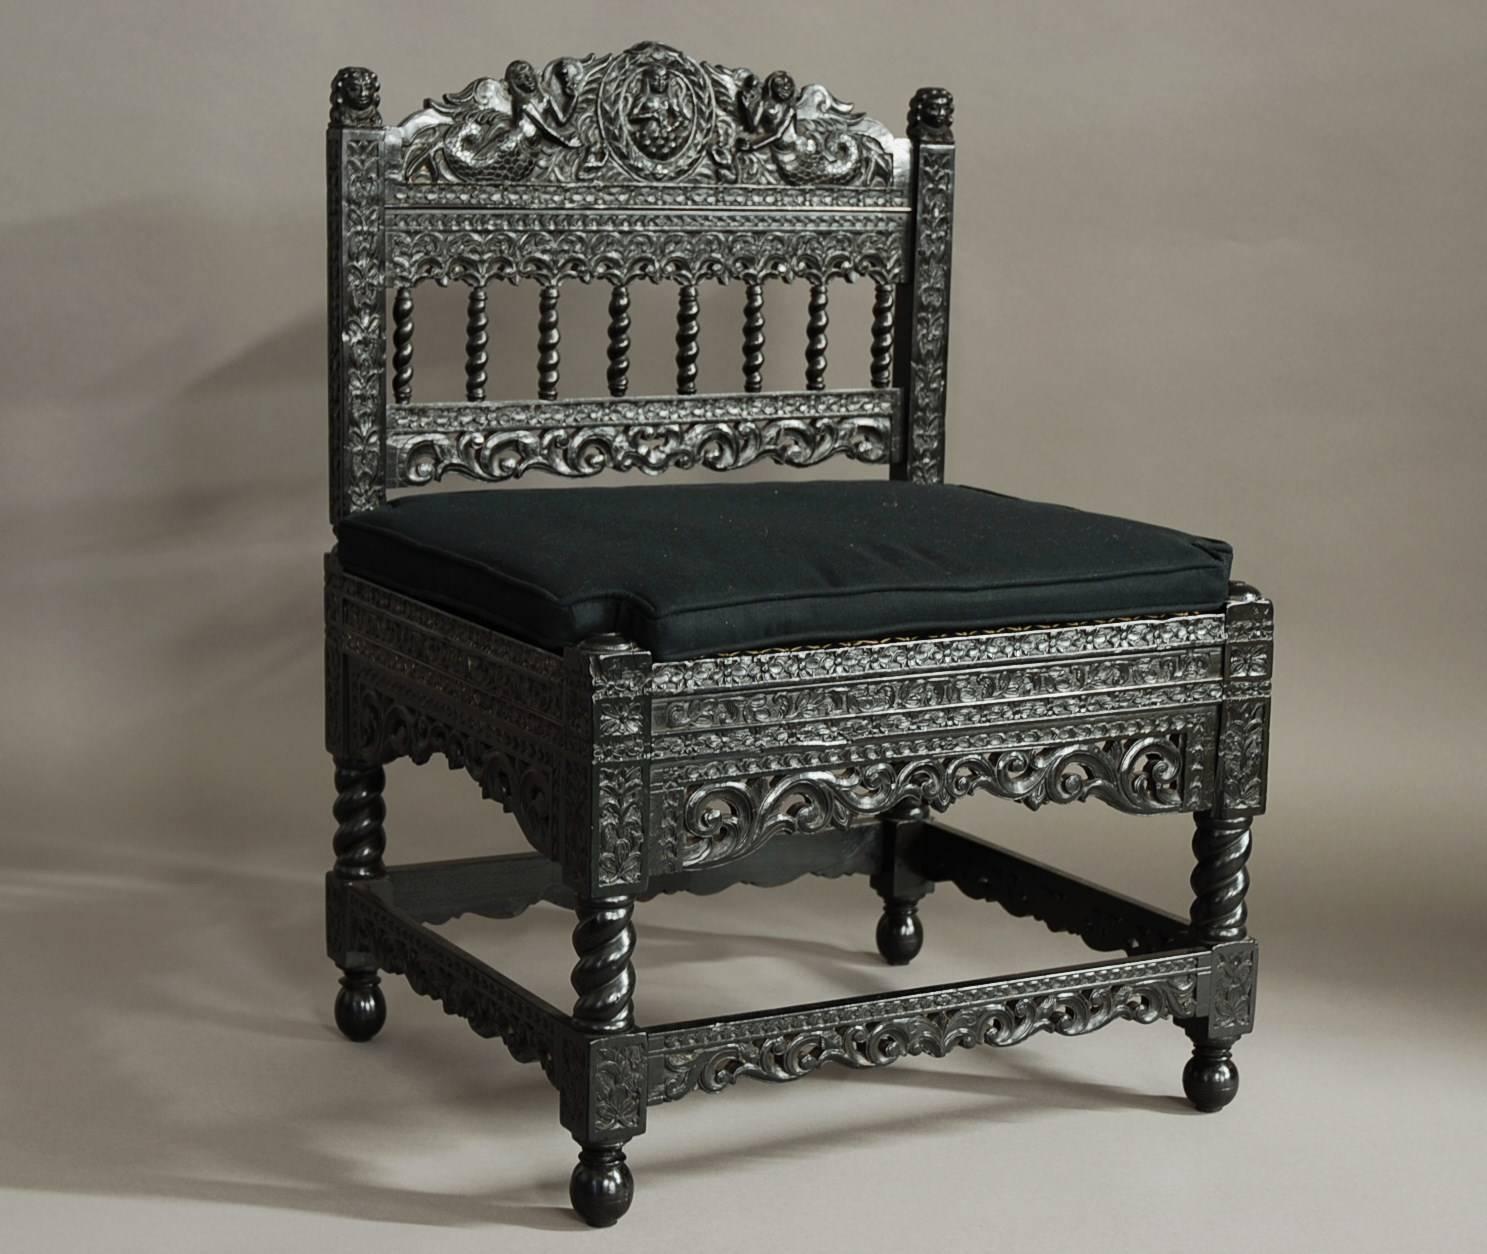 A superb quality late 17th century solid ebony low chair with intricate carving from The Coromandel Coast, India.

This chair, of museum quality, consists of a profusely carved back rail with a carved female figure to the centre surrounded by a